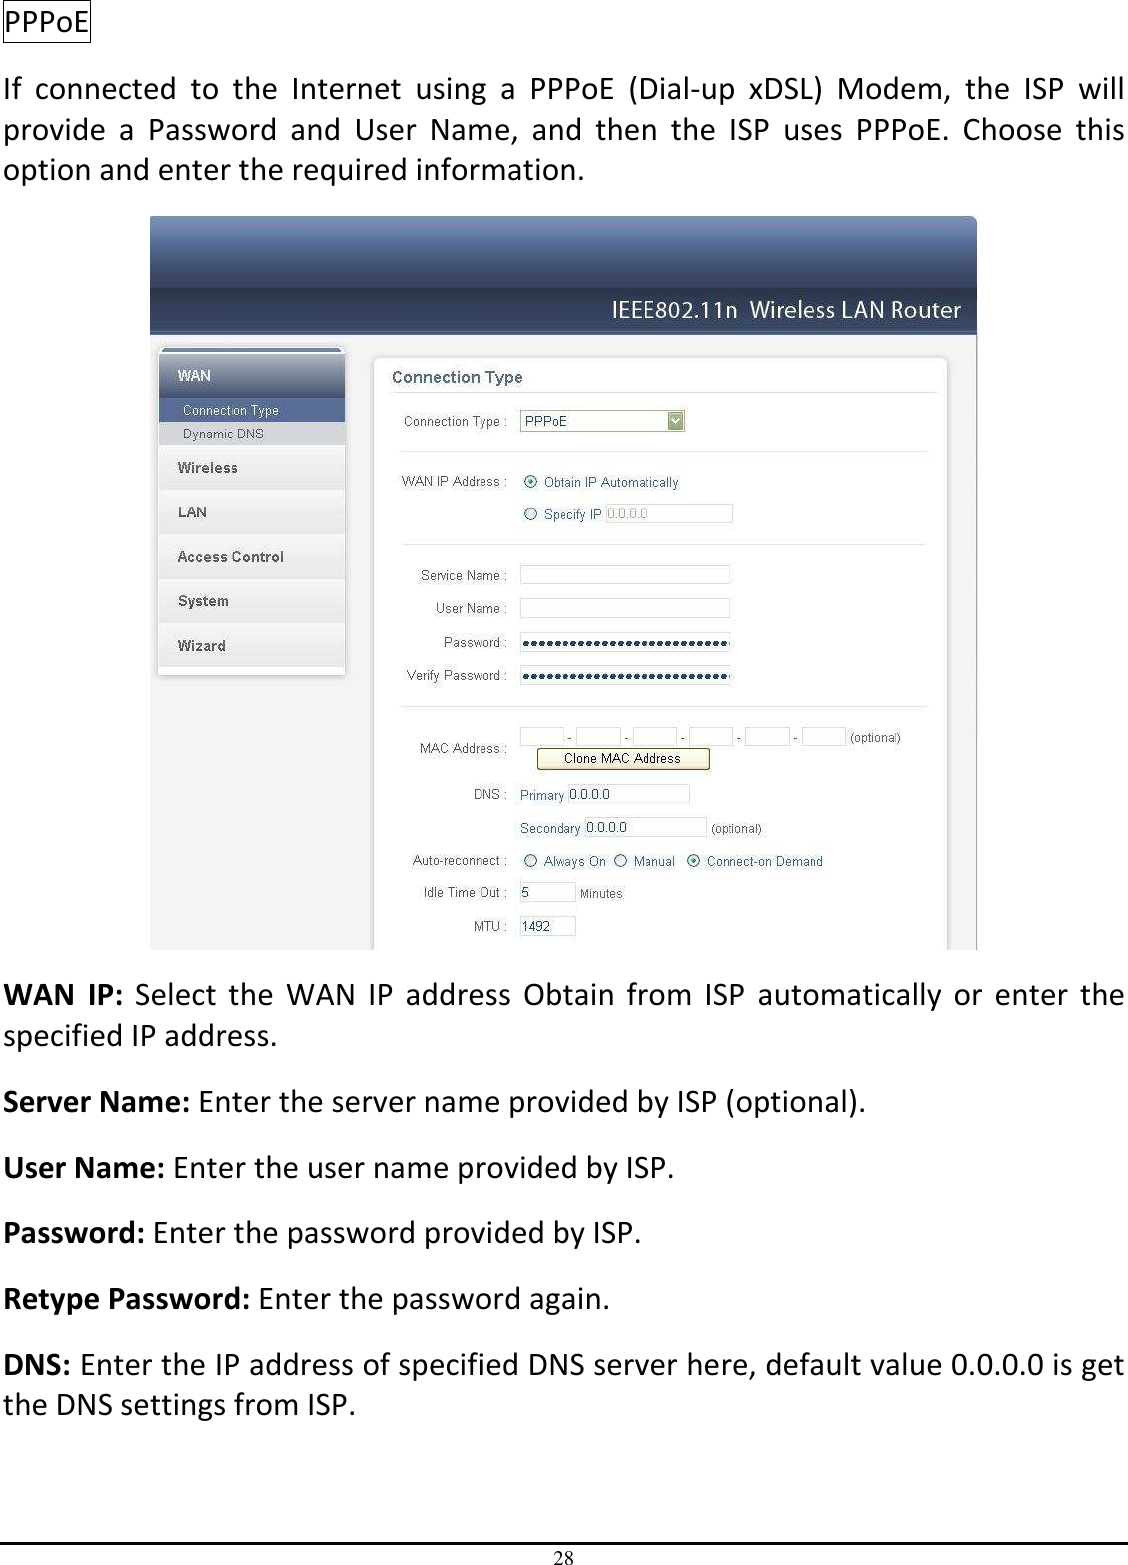 28 PPPoE  If  connected  to  the  Internet  using  a  PPPoE  (Dial-up  xDSL)  Modem,  the  ISP  will provide  a  Password  and  User  Name,  and  then  the  ISP  uses  PPPoE.  Choose  this option and enter the required information.  WAN  IP:  Select  the  WAN  IP  address  Obtain  from  ISP  automatically  or  enter  the specified IP address. Server Name: Enter the server name provided by ISP (optional). User Name: Enter the user name provided by ISP. Password: Enter the password provided by ISP. Retype Password: Enter the password again. DNS: Enter the IP address of specified DNS server here, default value 0.0.0.0 is get the DNS settings from ISP. 